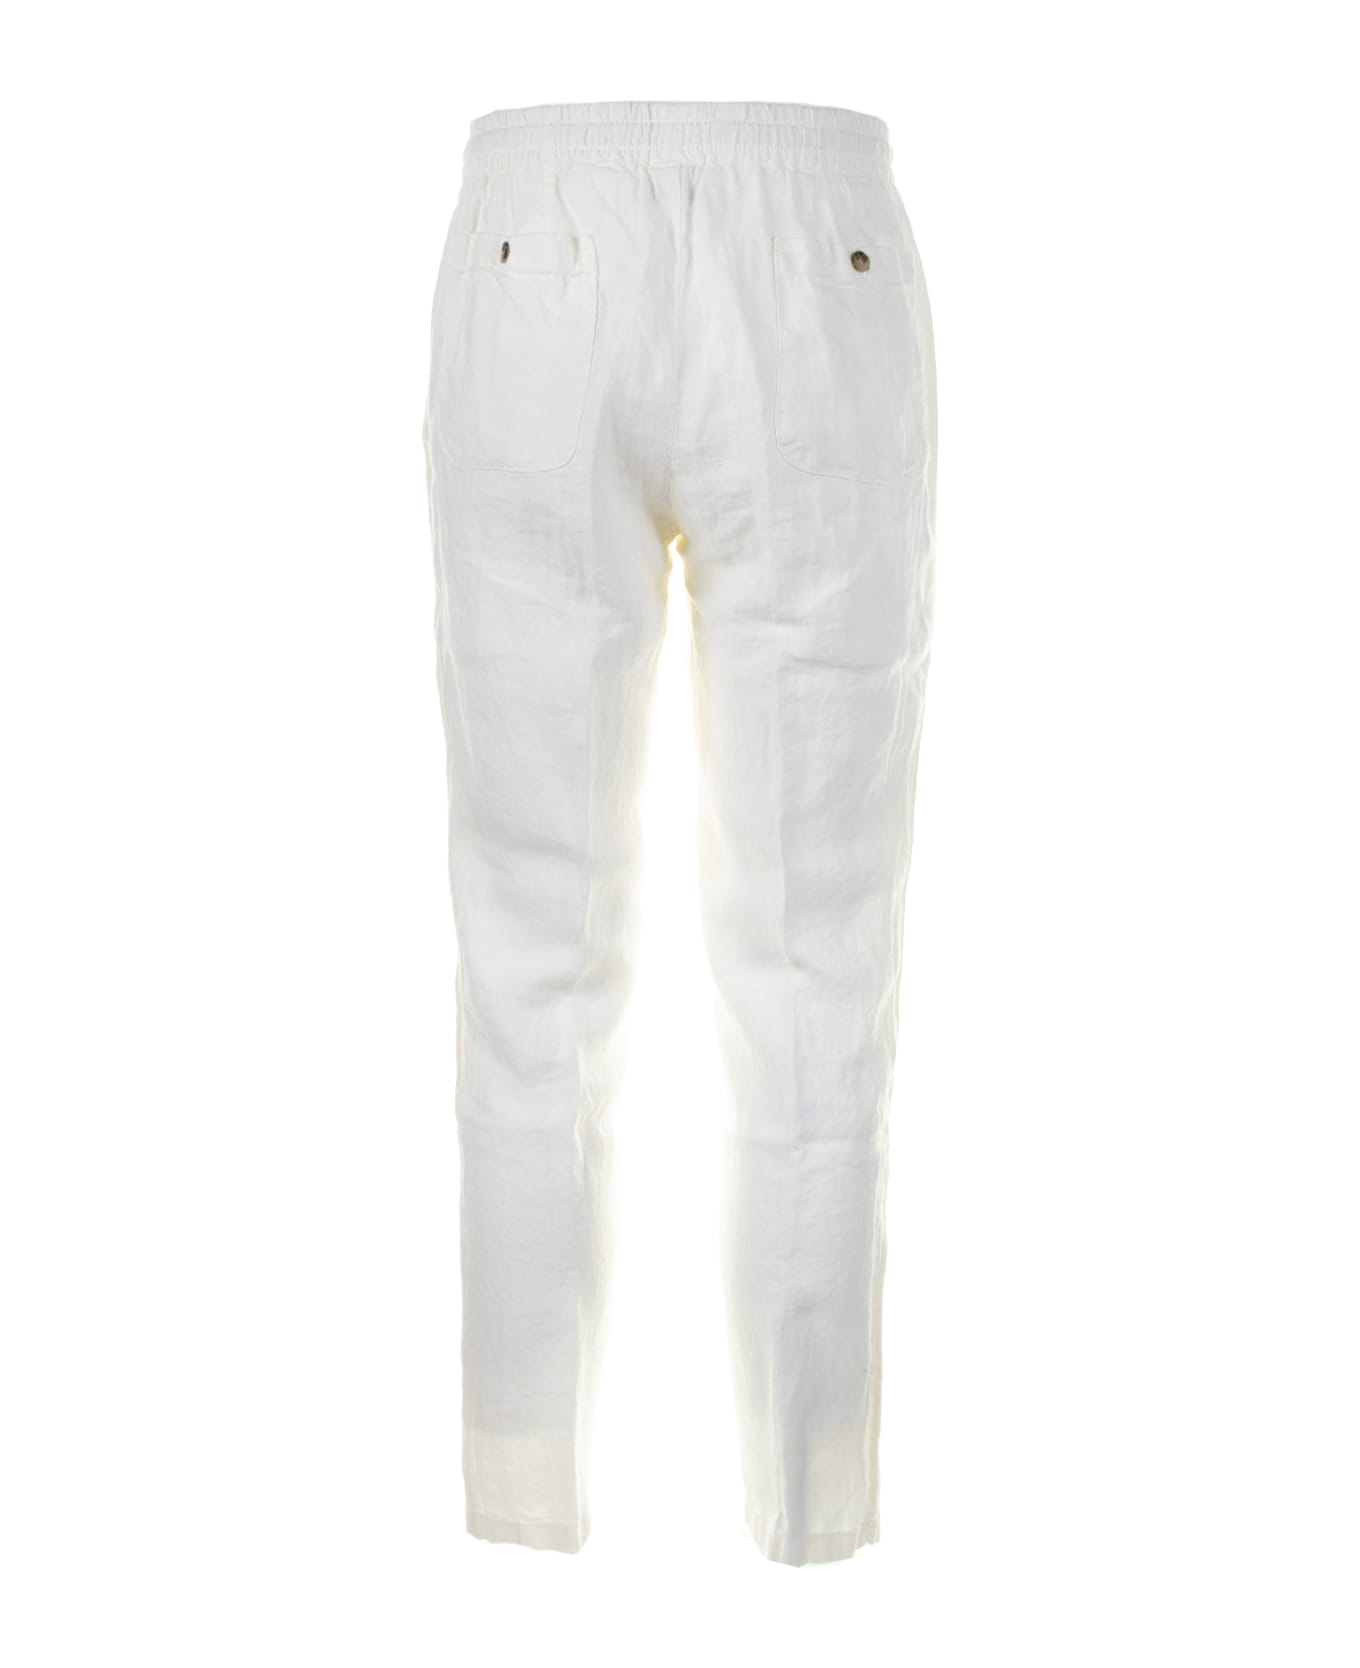 Altea White Linen Trousers With Drawstring - BIANCO